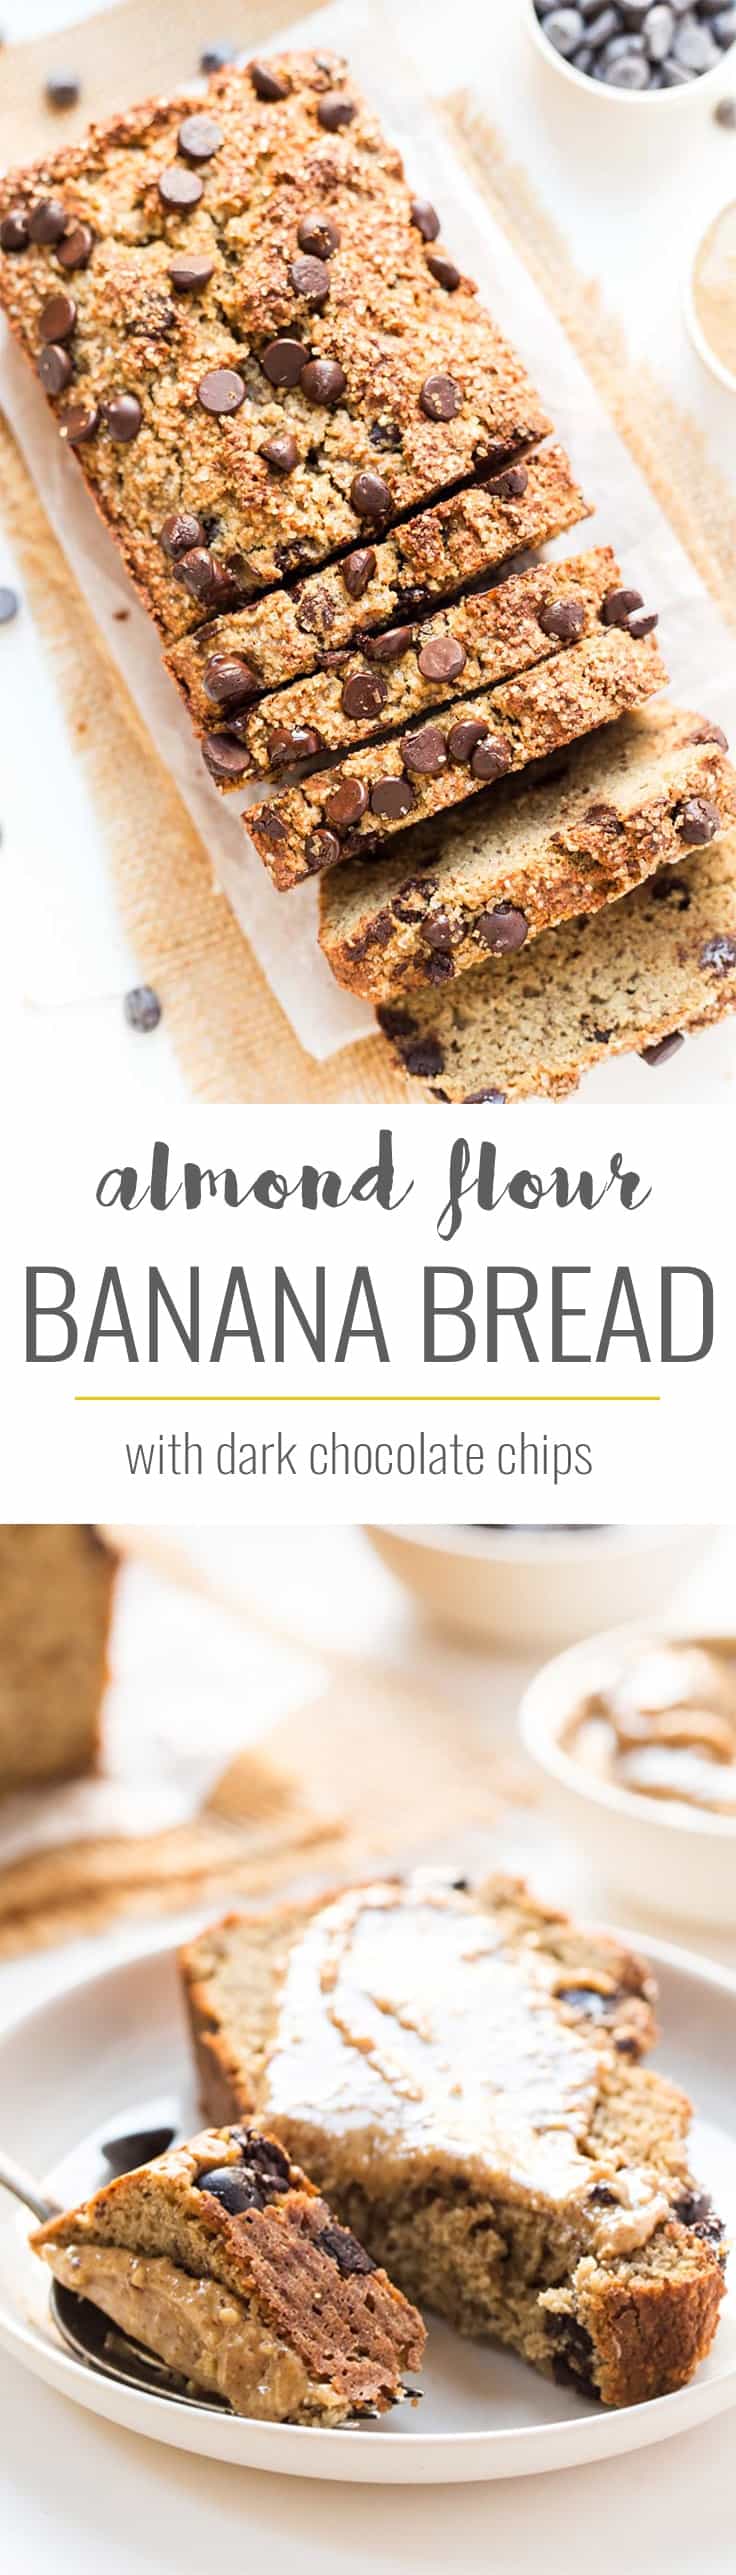 This is the most INSANELY DELICIOUS Chocolate Chip Banana Bread and it's made with 100% healthy ingredients -- almond flour, quinoa flour, flax and more!